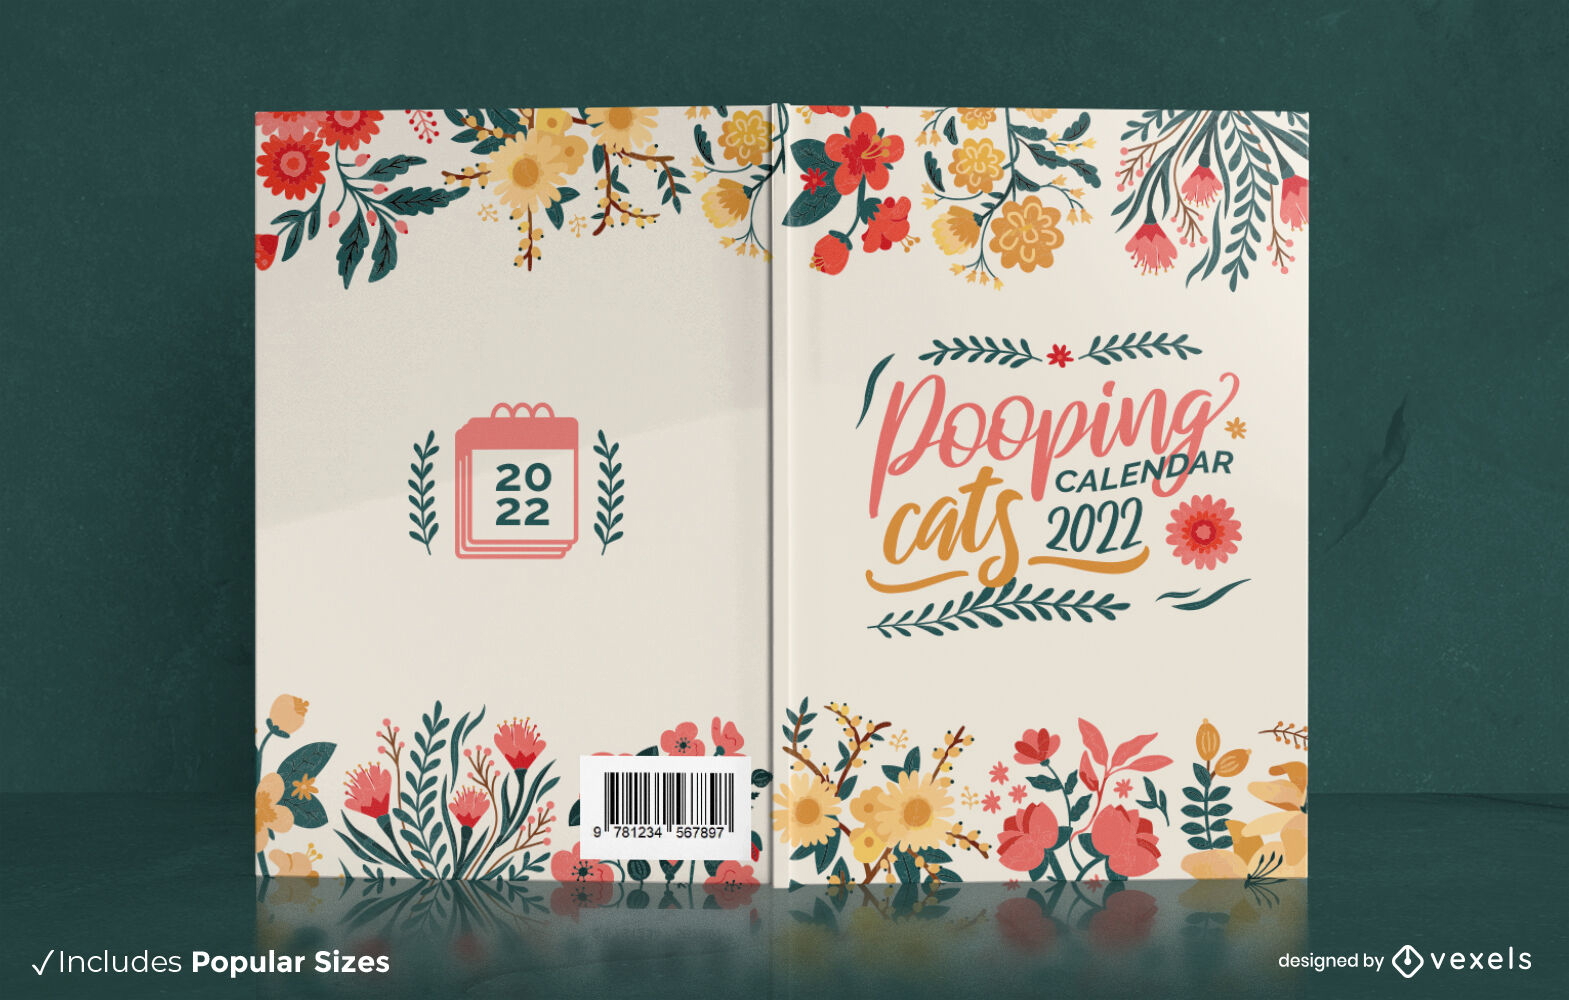 Flowers and leaves book cover design